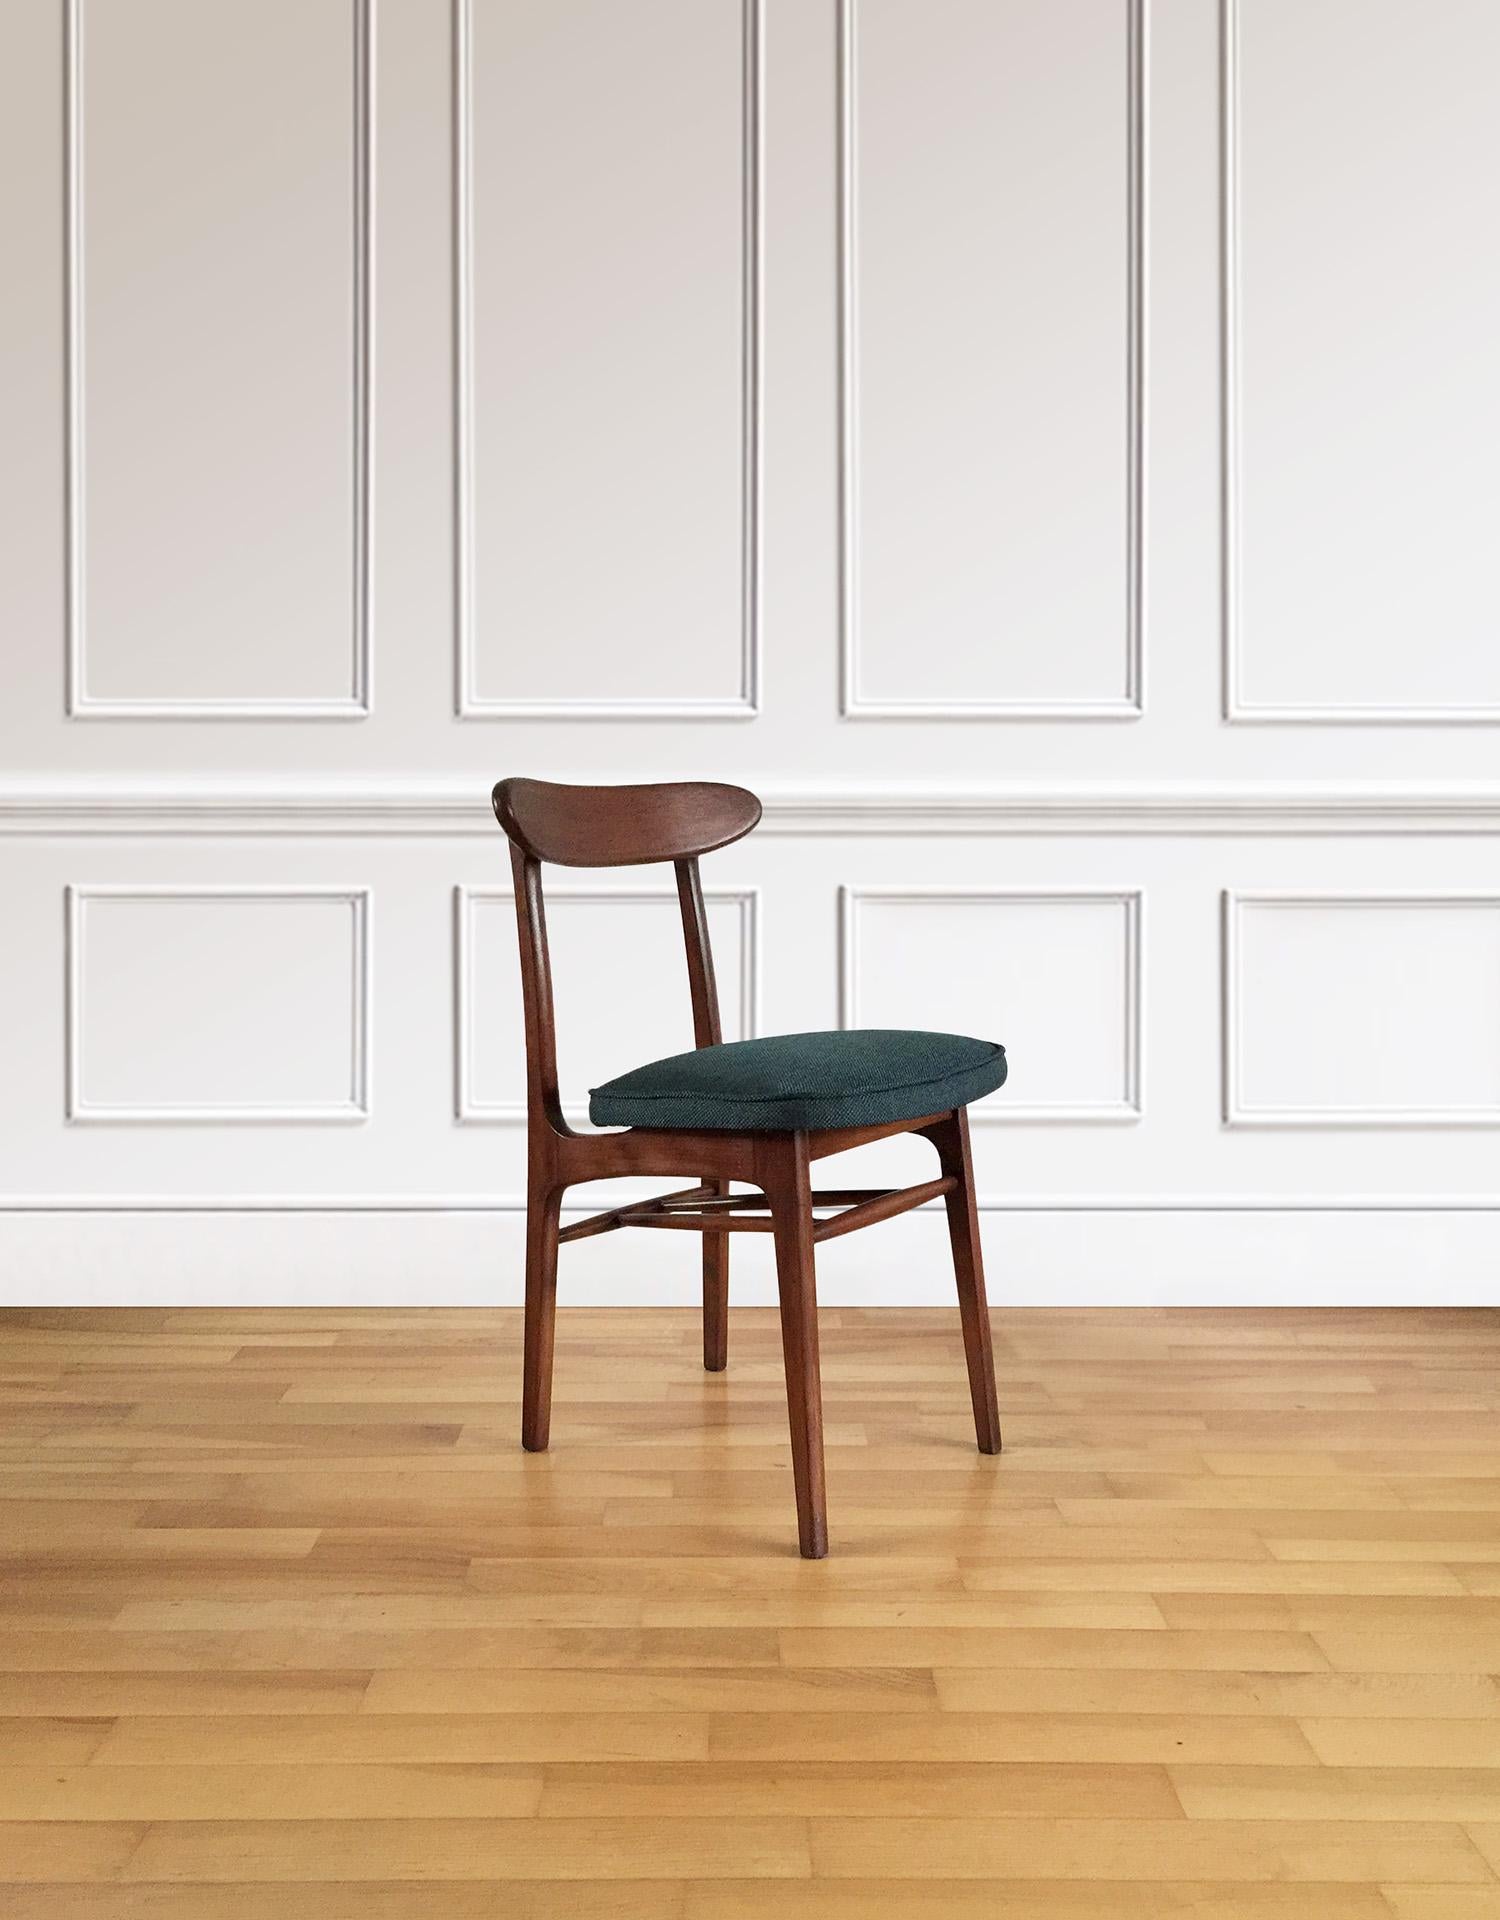 This set of two chairs, model 5908, was designed by Rajmund Teofil Halas, one of the most recognizable projects of Polish design in the 1960s. The chairs have a simple, modernist silhouette. The construction is made of beech wood, new upholstery